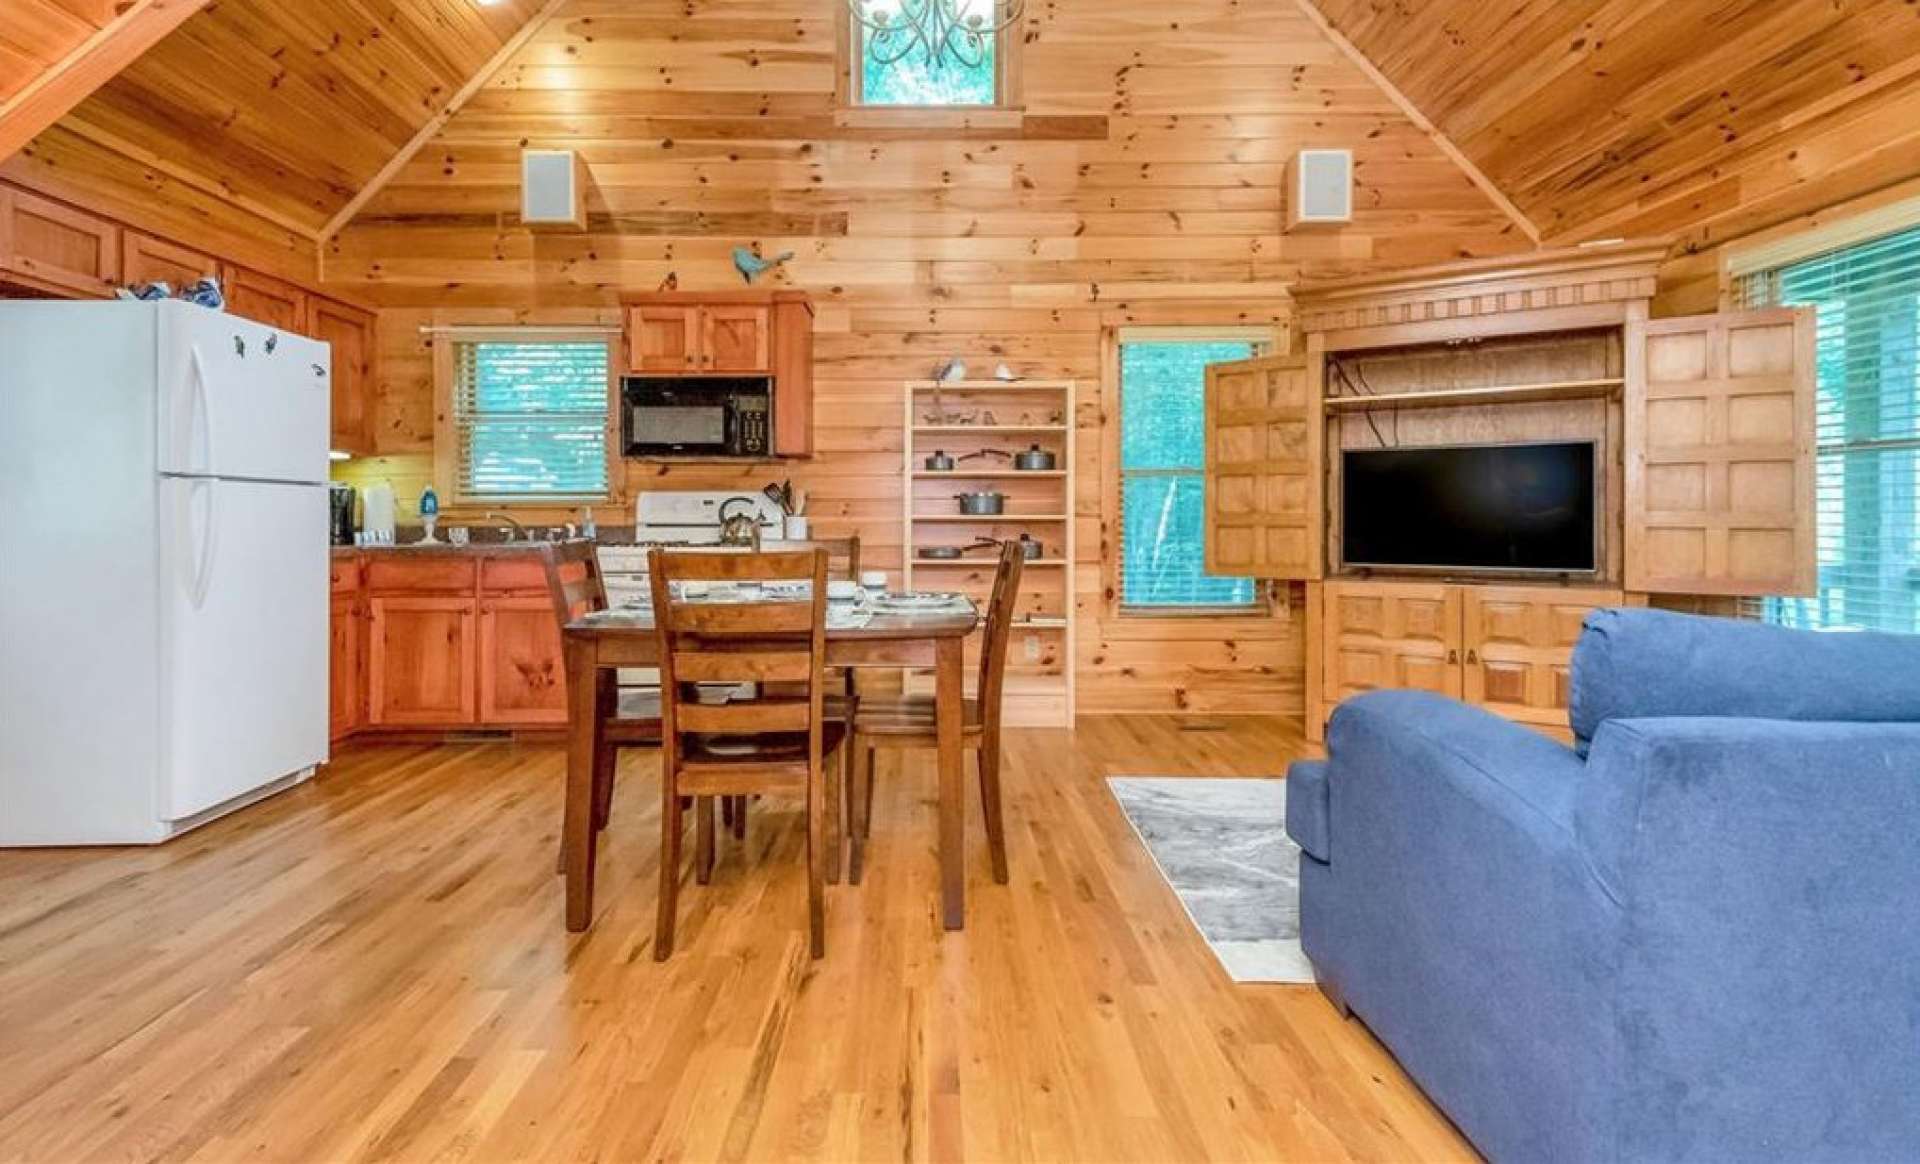 You'll feel the cabin vibe with tongue and grove ceilings and hard wood floors throughout.